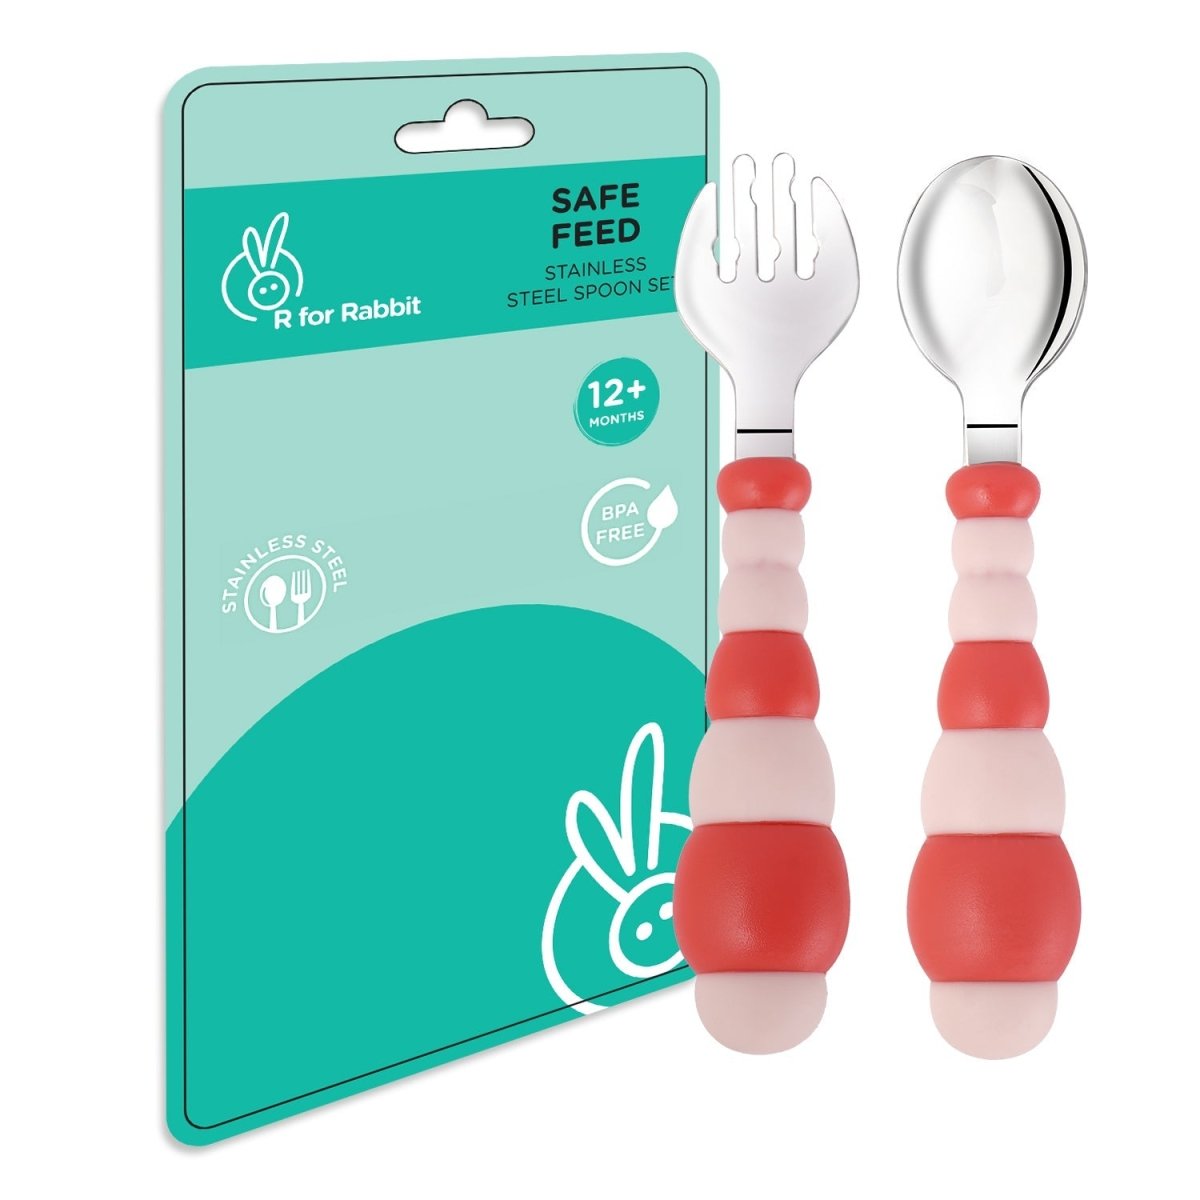 R for Rabbit Safe Feed Stainless Steel Spoon Set- Pink - SFSSP01